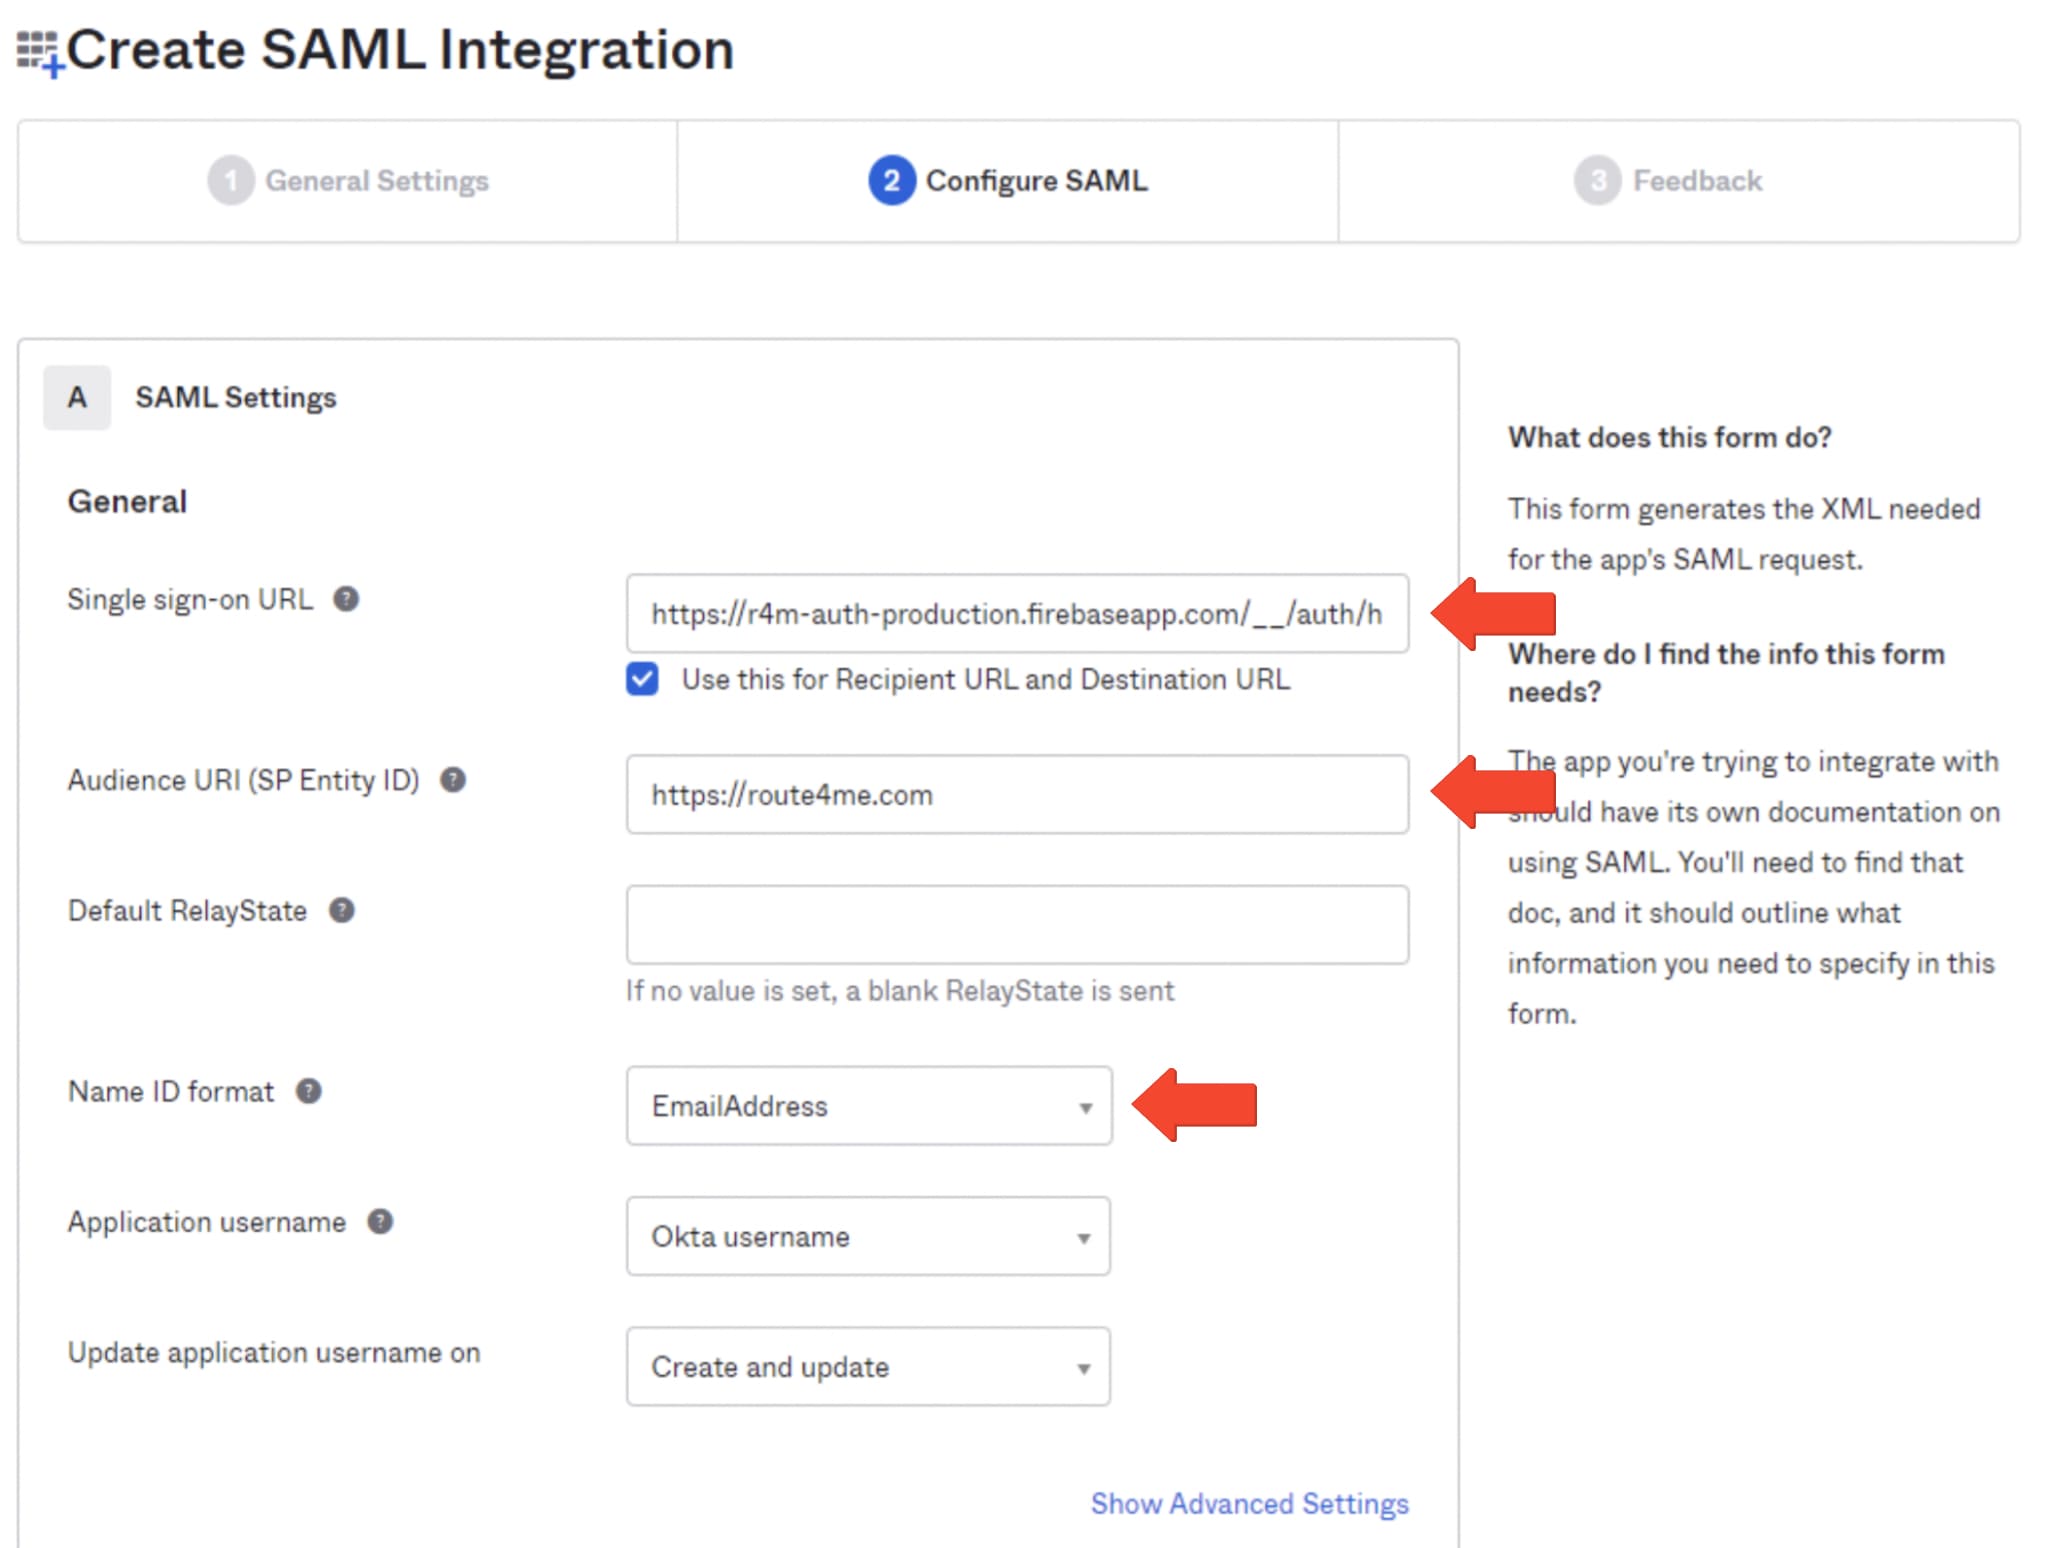 Configure your SAML SSO URL and Name ID format.